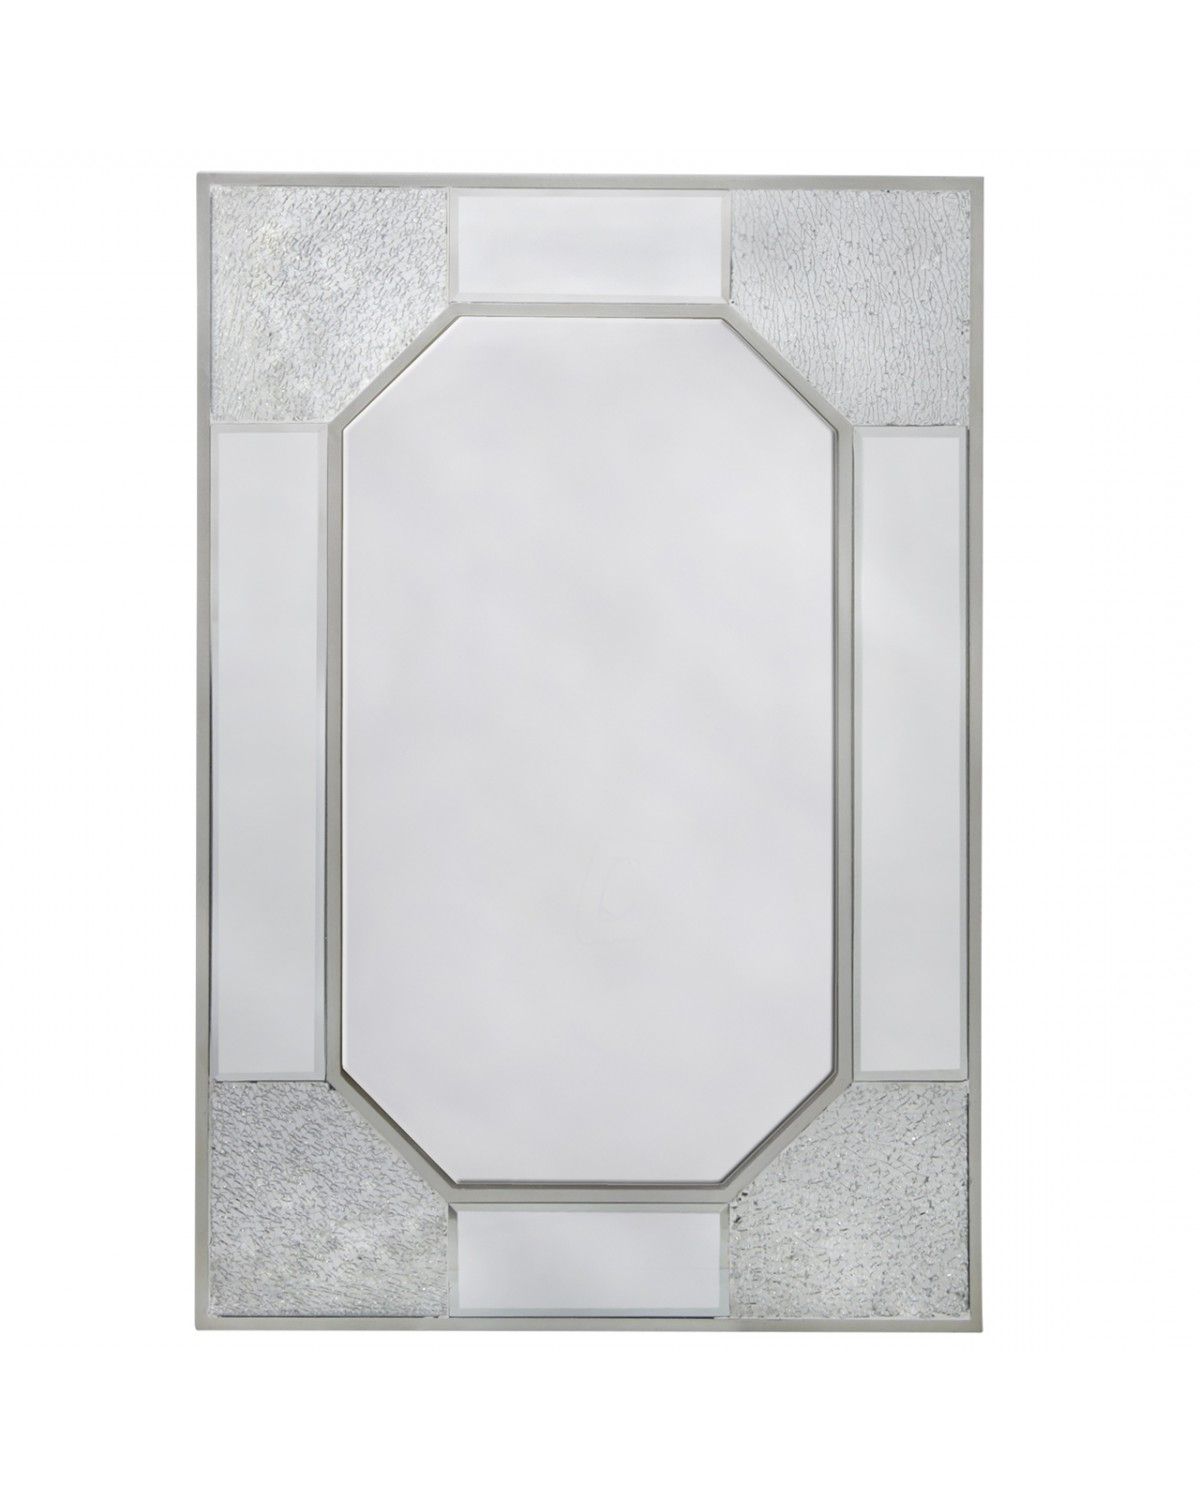 Value Melrose Sparkle Wall Mirror (View 12 of 20)